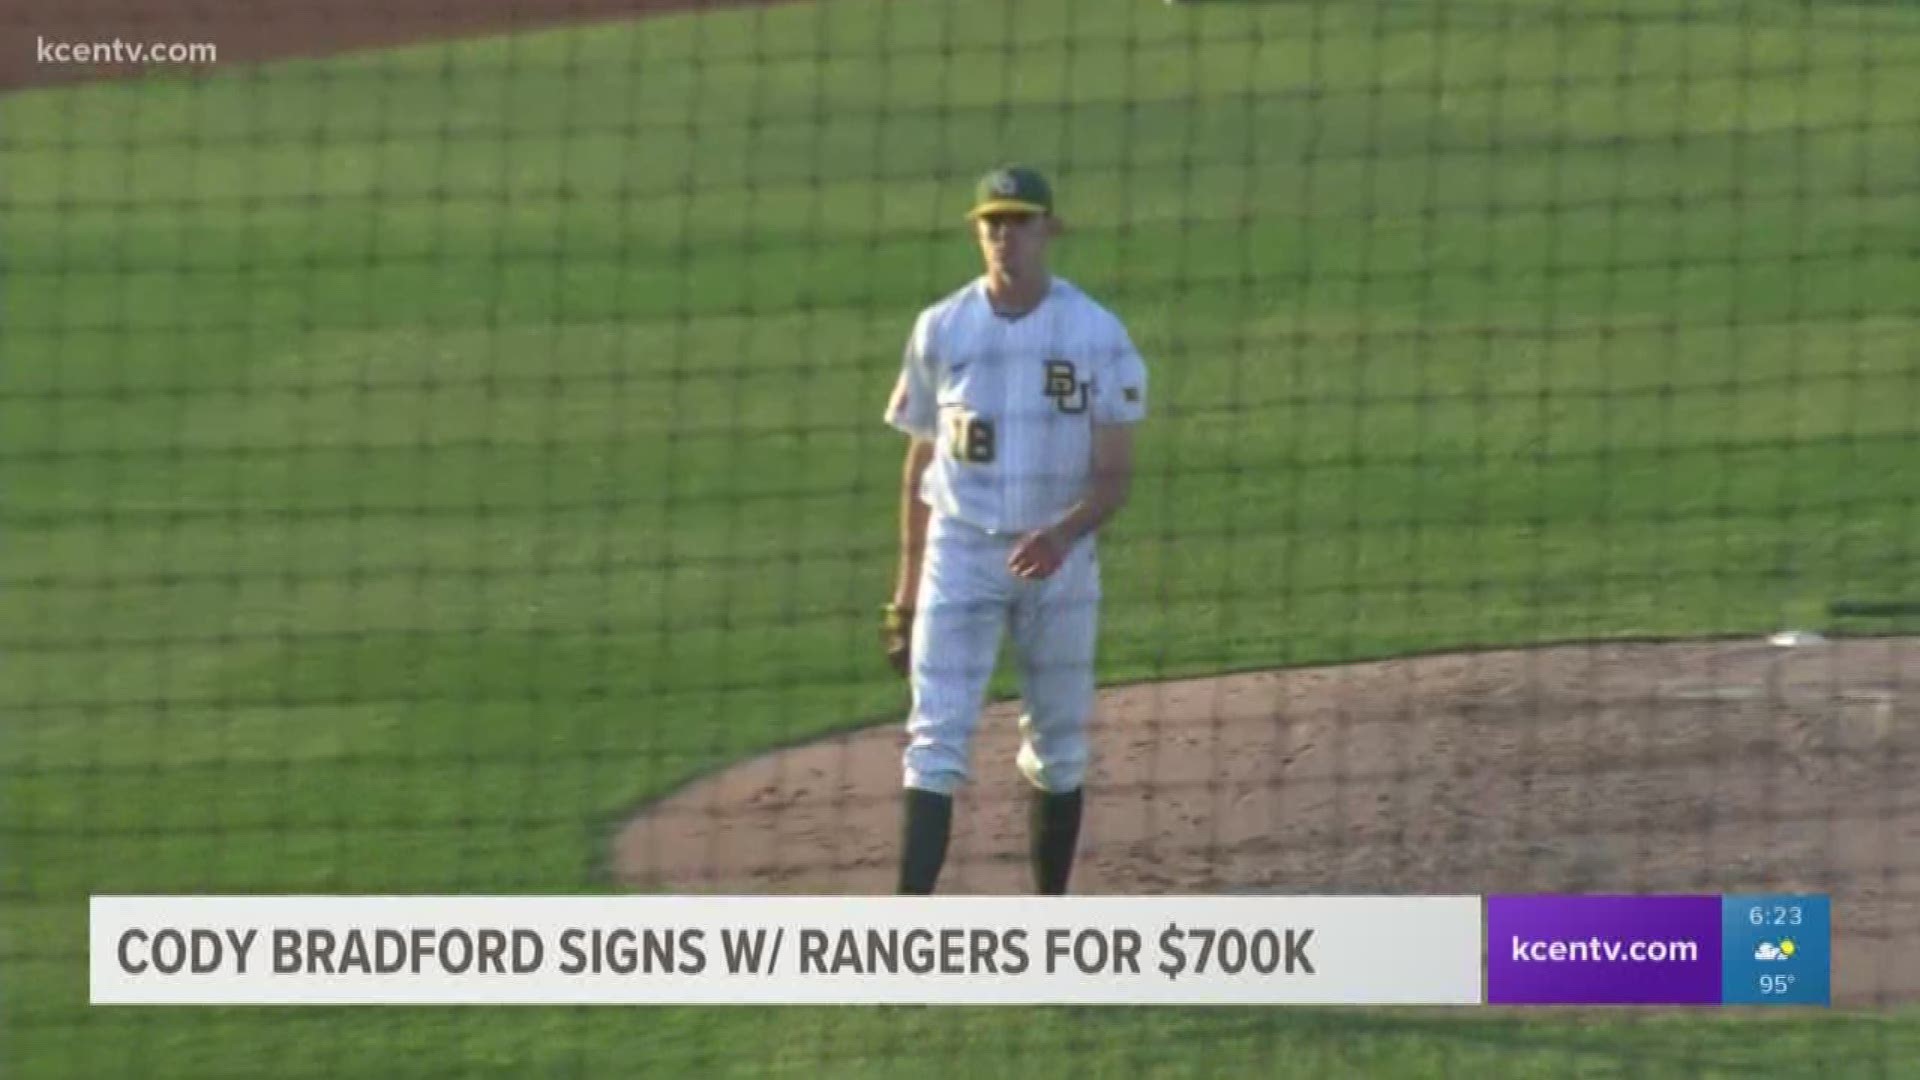 Cody Bradford was the 2018 Big 12 Pitcher of the Year, but a thoracic outlet surgery cut his 2019 season short and damaged his draft stock. He signed for $700,000, which is $418,000 above his slotted value.